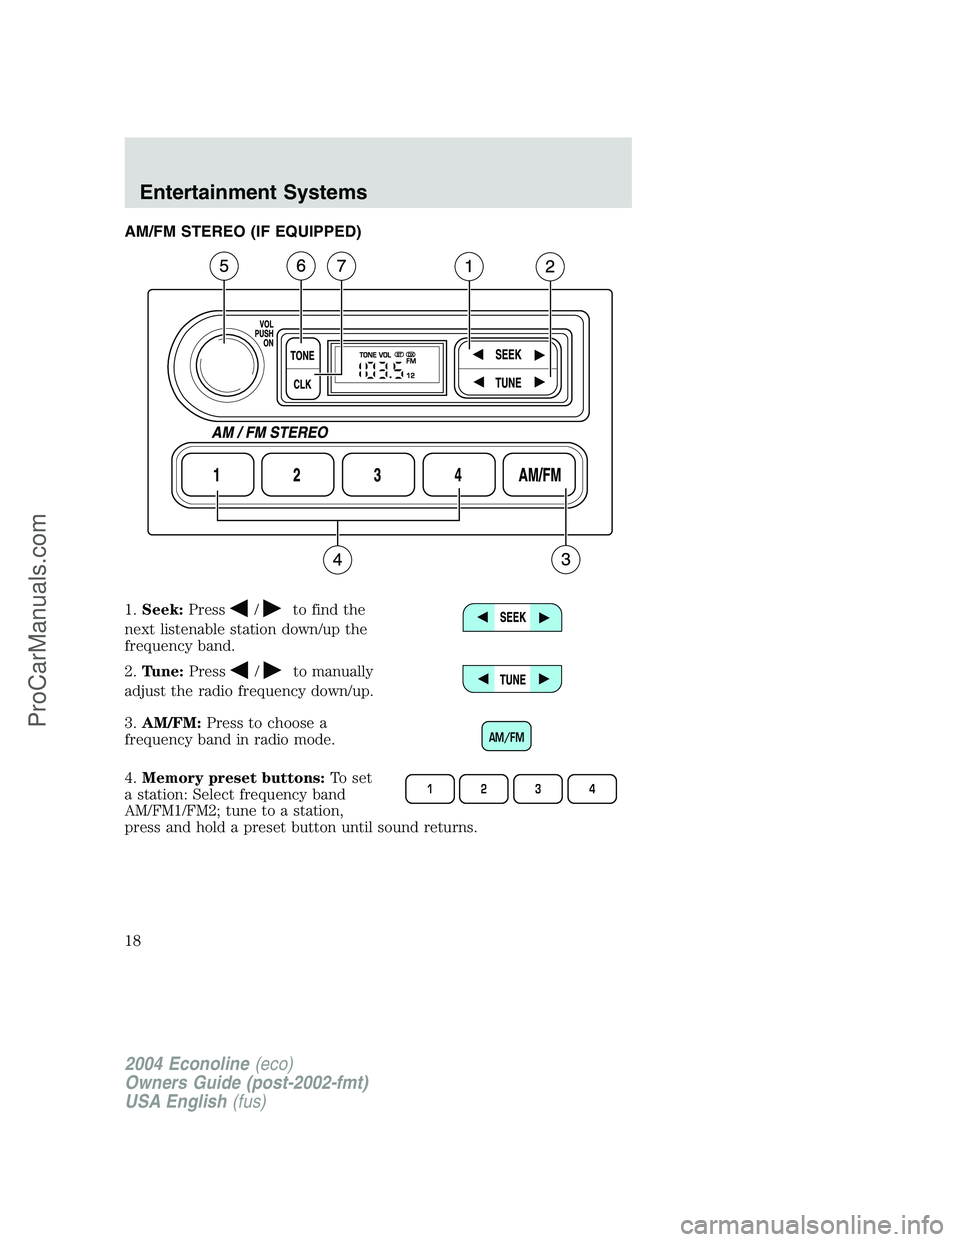 FORD E-350 2004 User Guide AM/FM STEREO (IF EQUIPPED)
1.Seek:Press
/to find the
next listenable station down/up the
frequency band.
2.Tune:Press
/to manually
adjust the radio frequency down/up.
3.AM/FM:Press to choose a
frequen